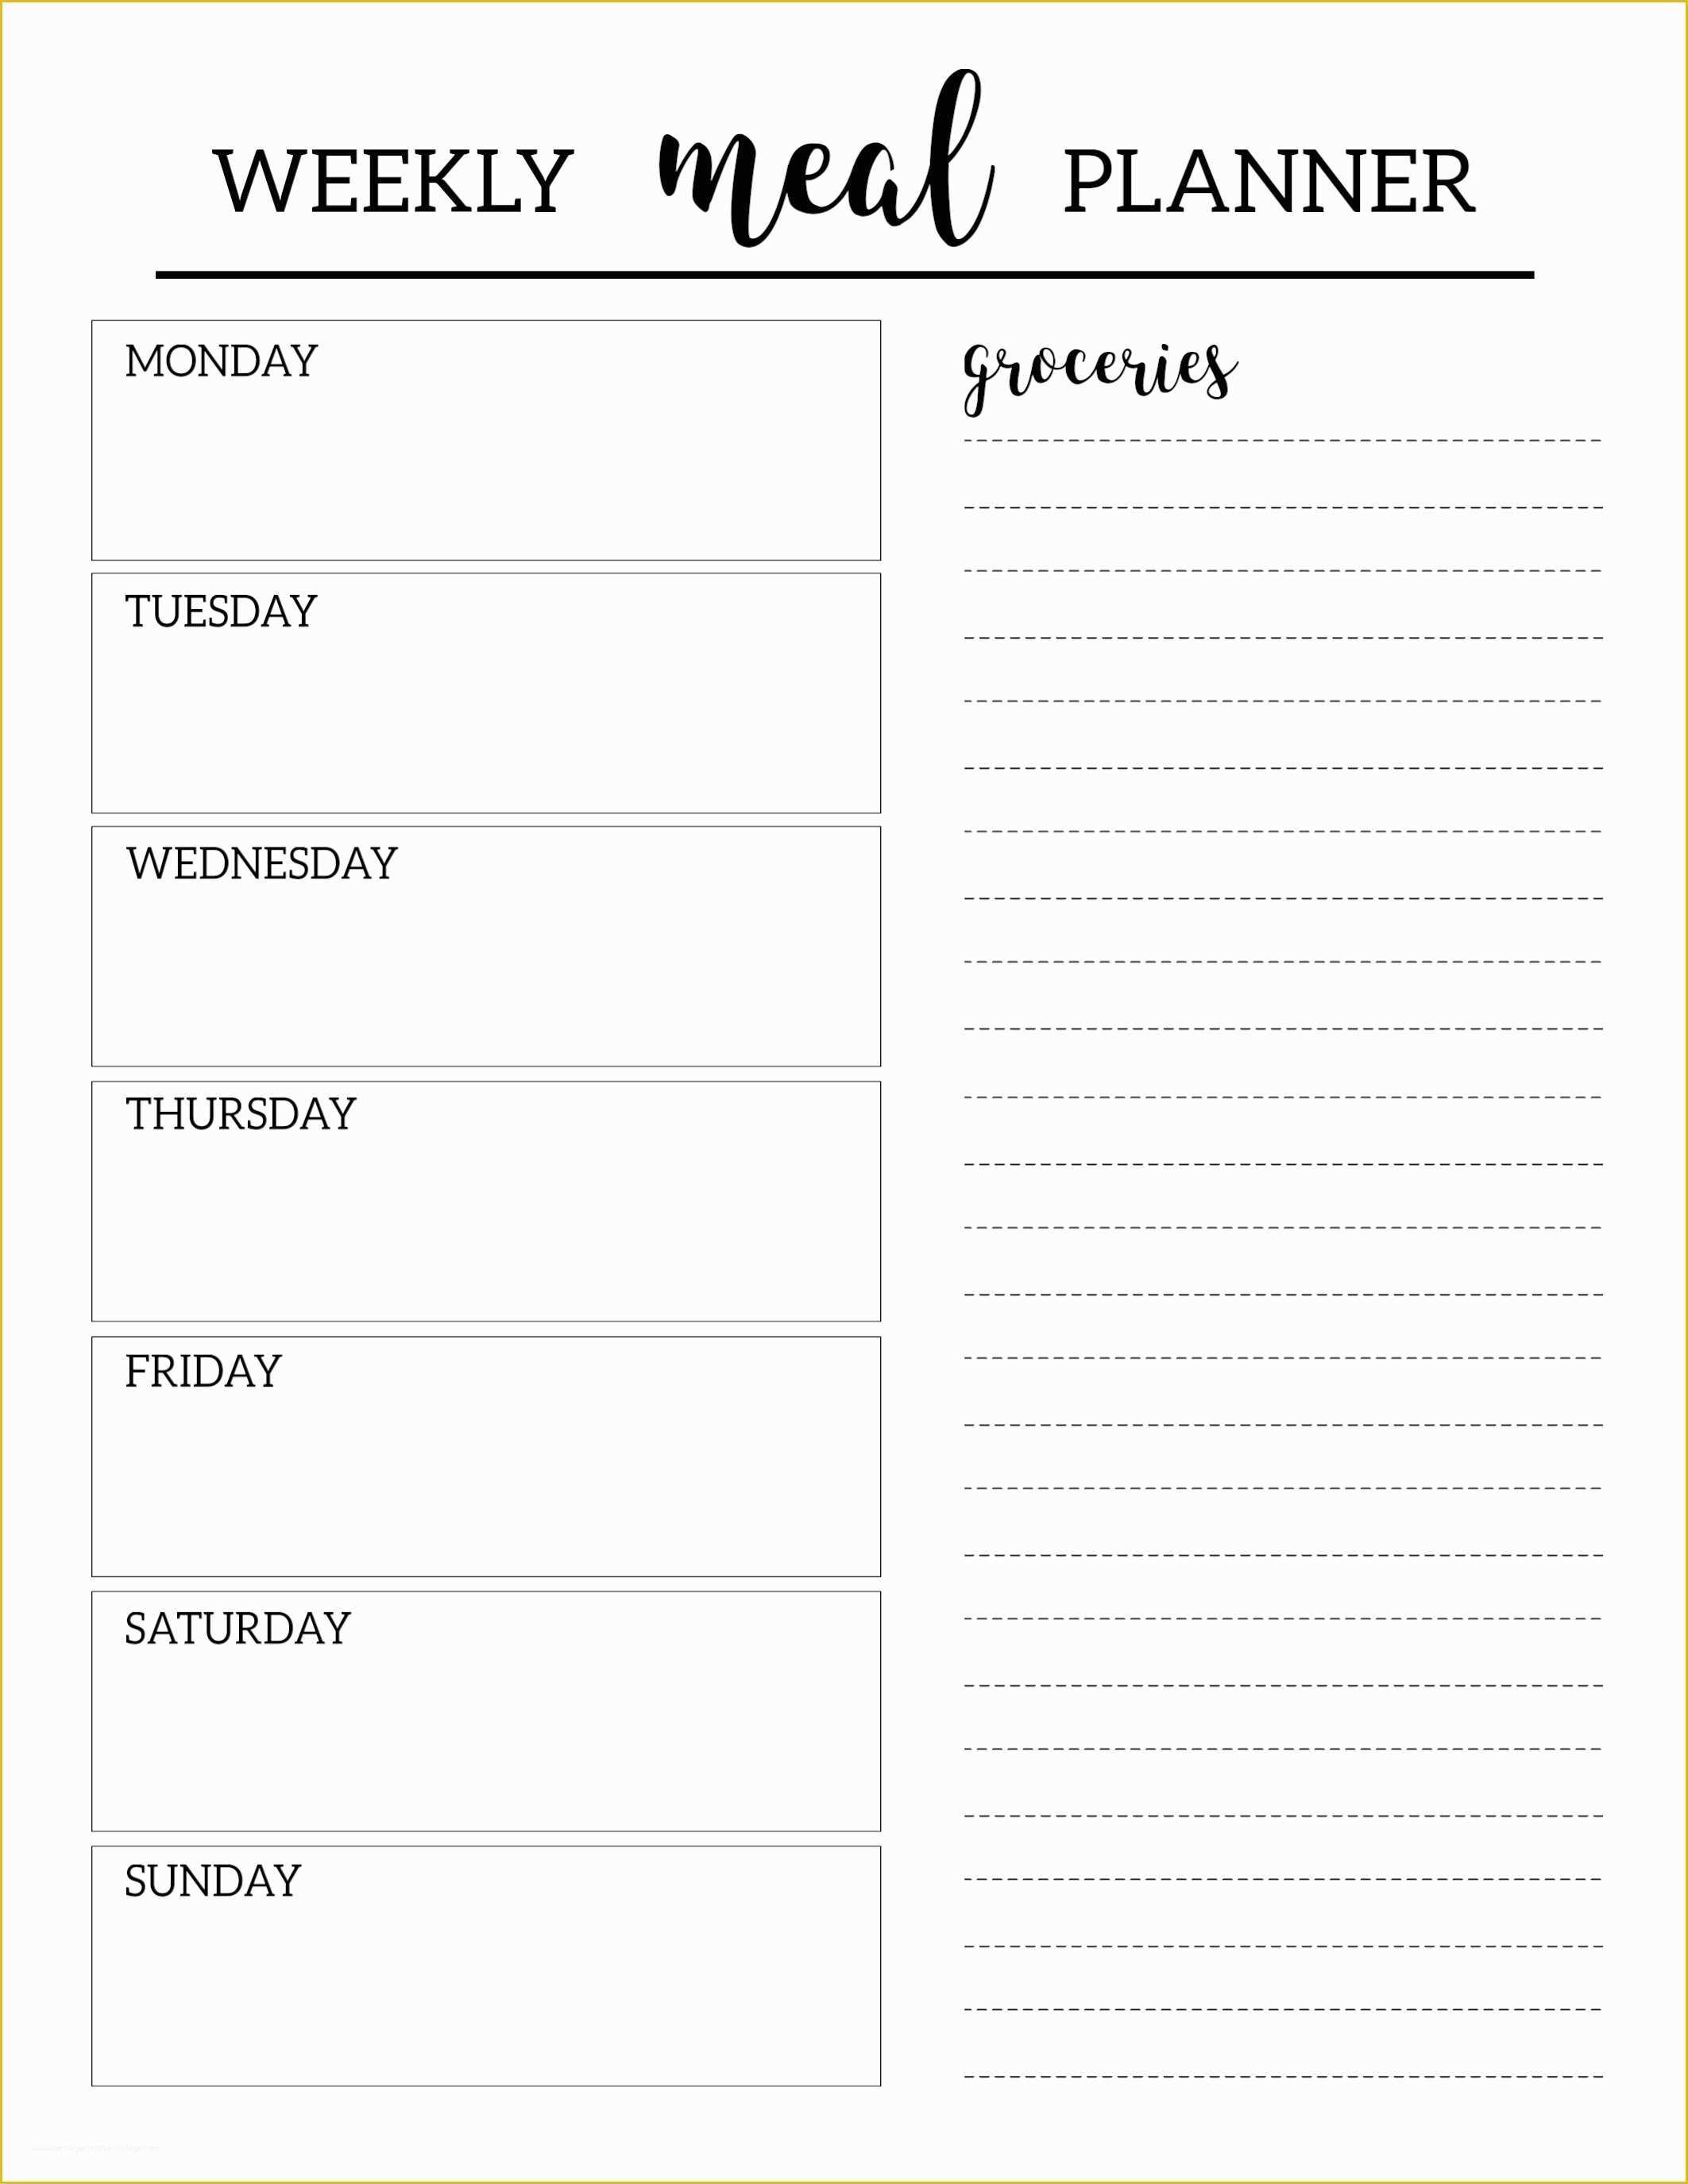 Free Weekly Meal Planner Template Of Free Printable Meal Planner Template Paper Trail Design